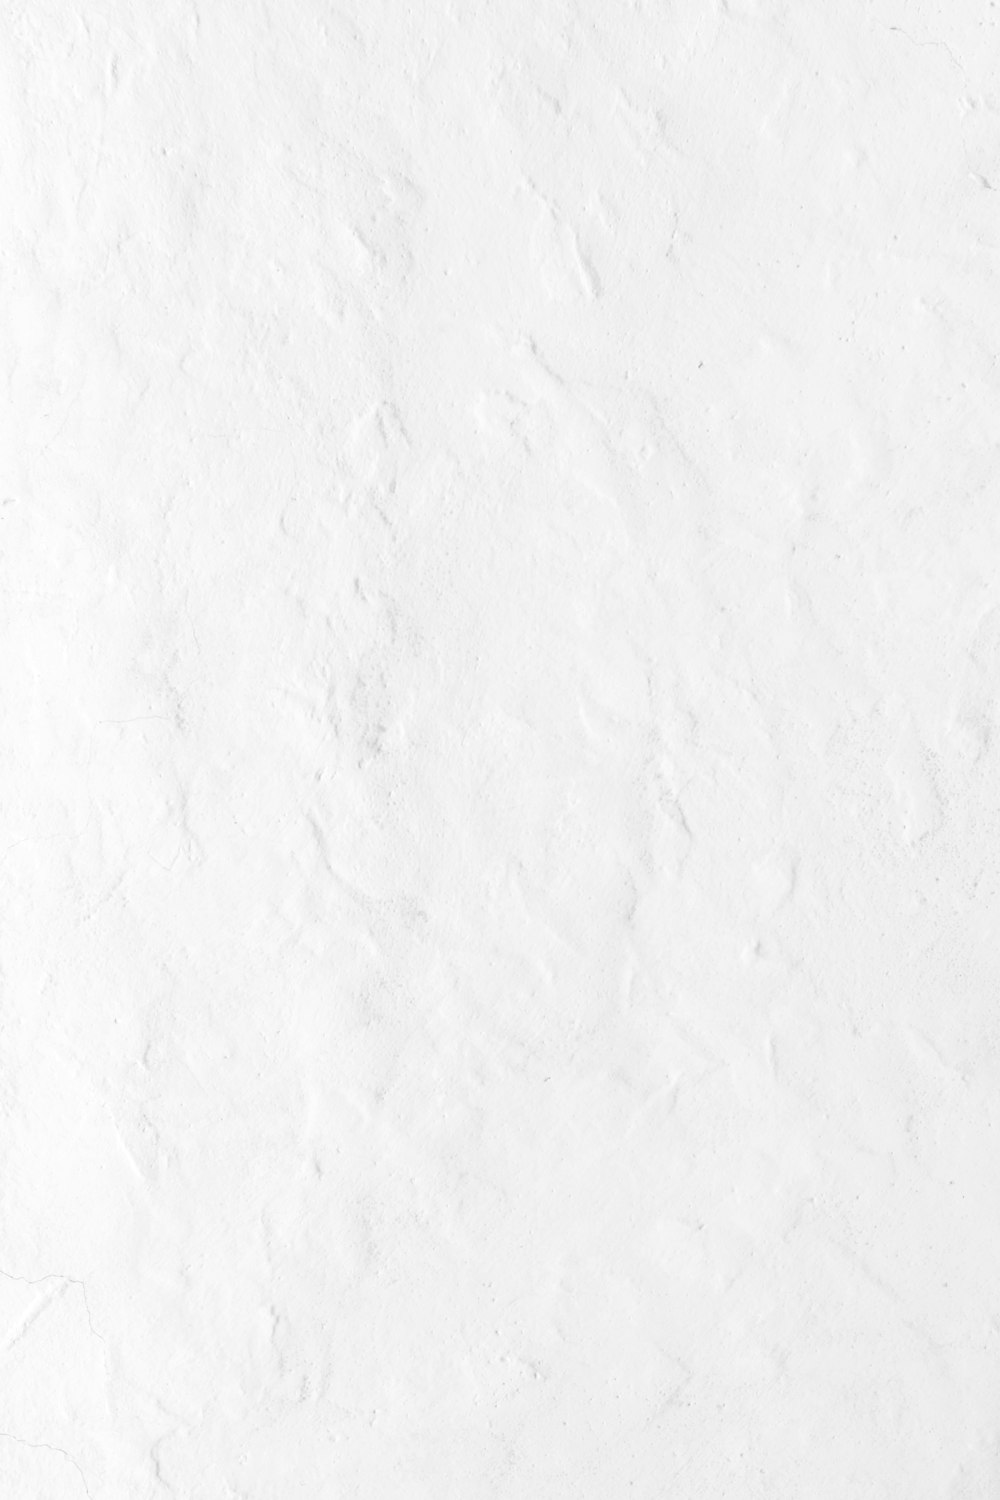 900 White Background Images Download Hd Backgrounds On Unsplash